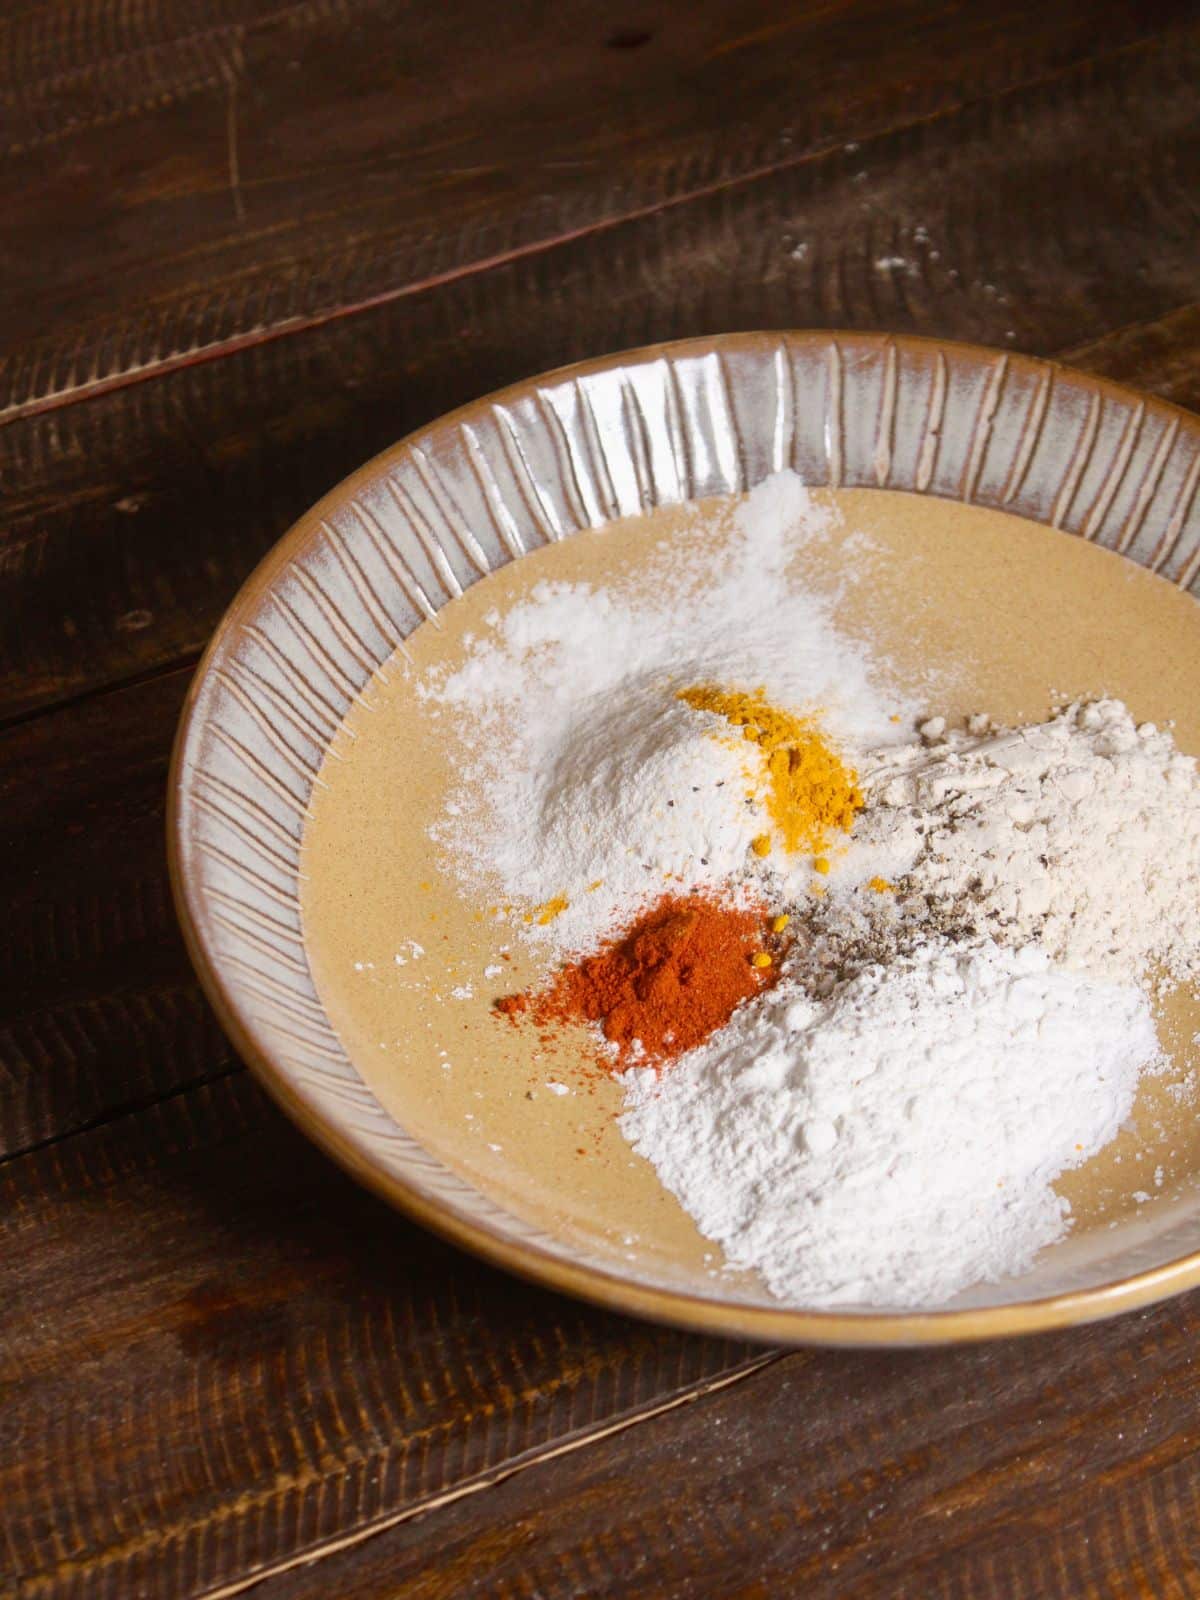 add powdered spices to the flour and mix well